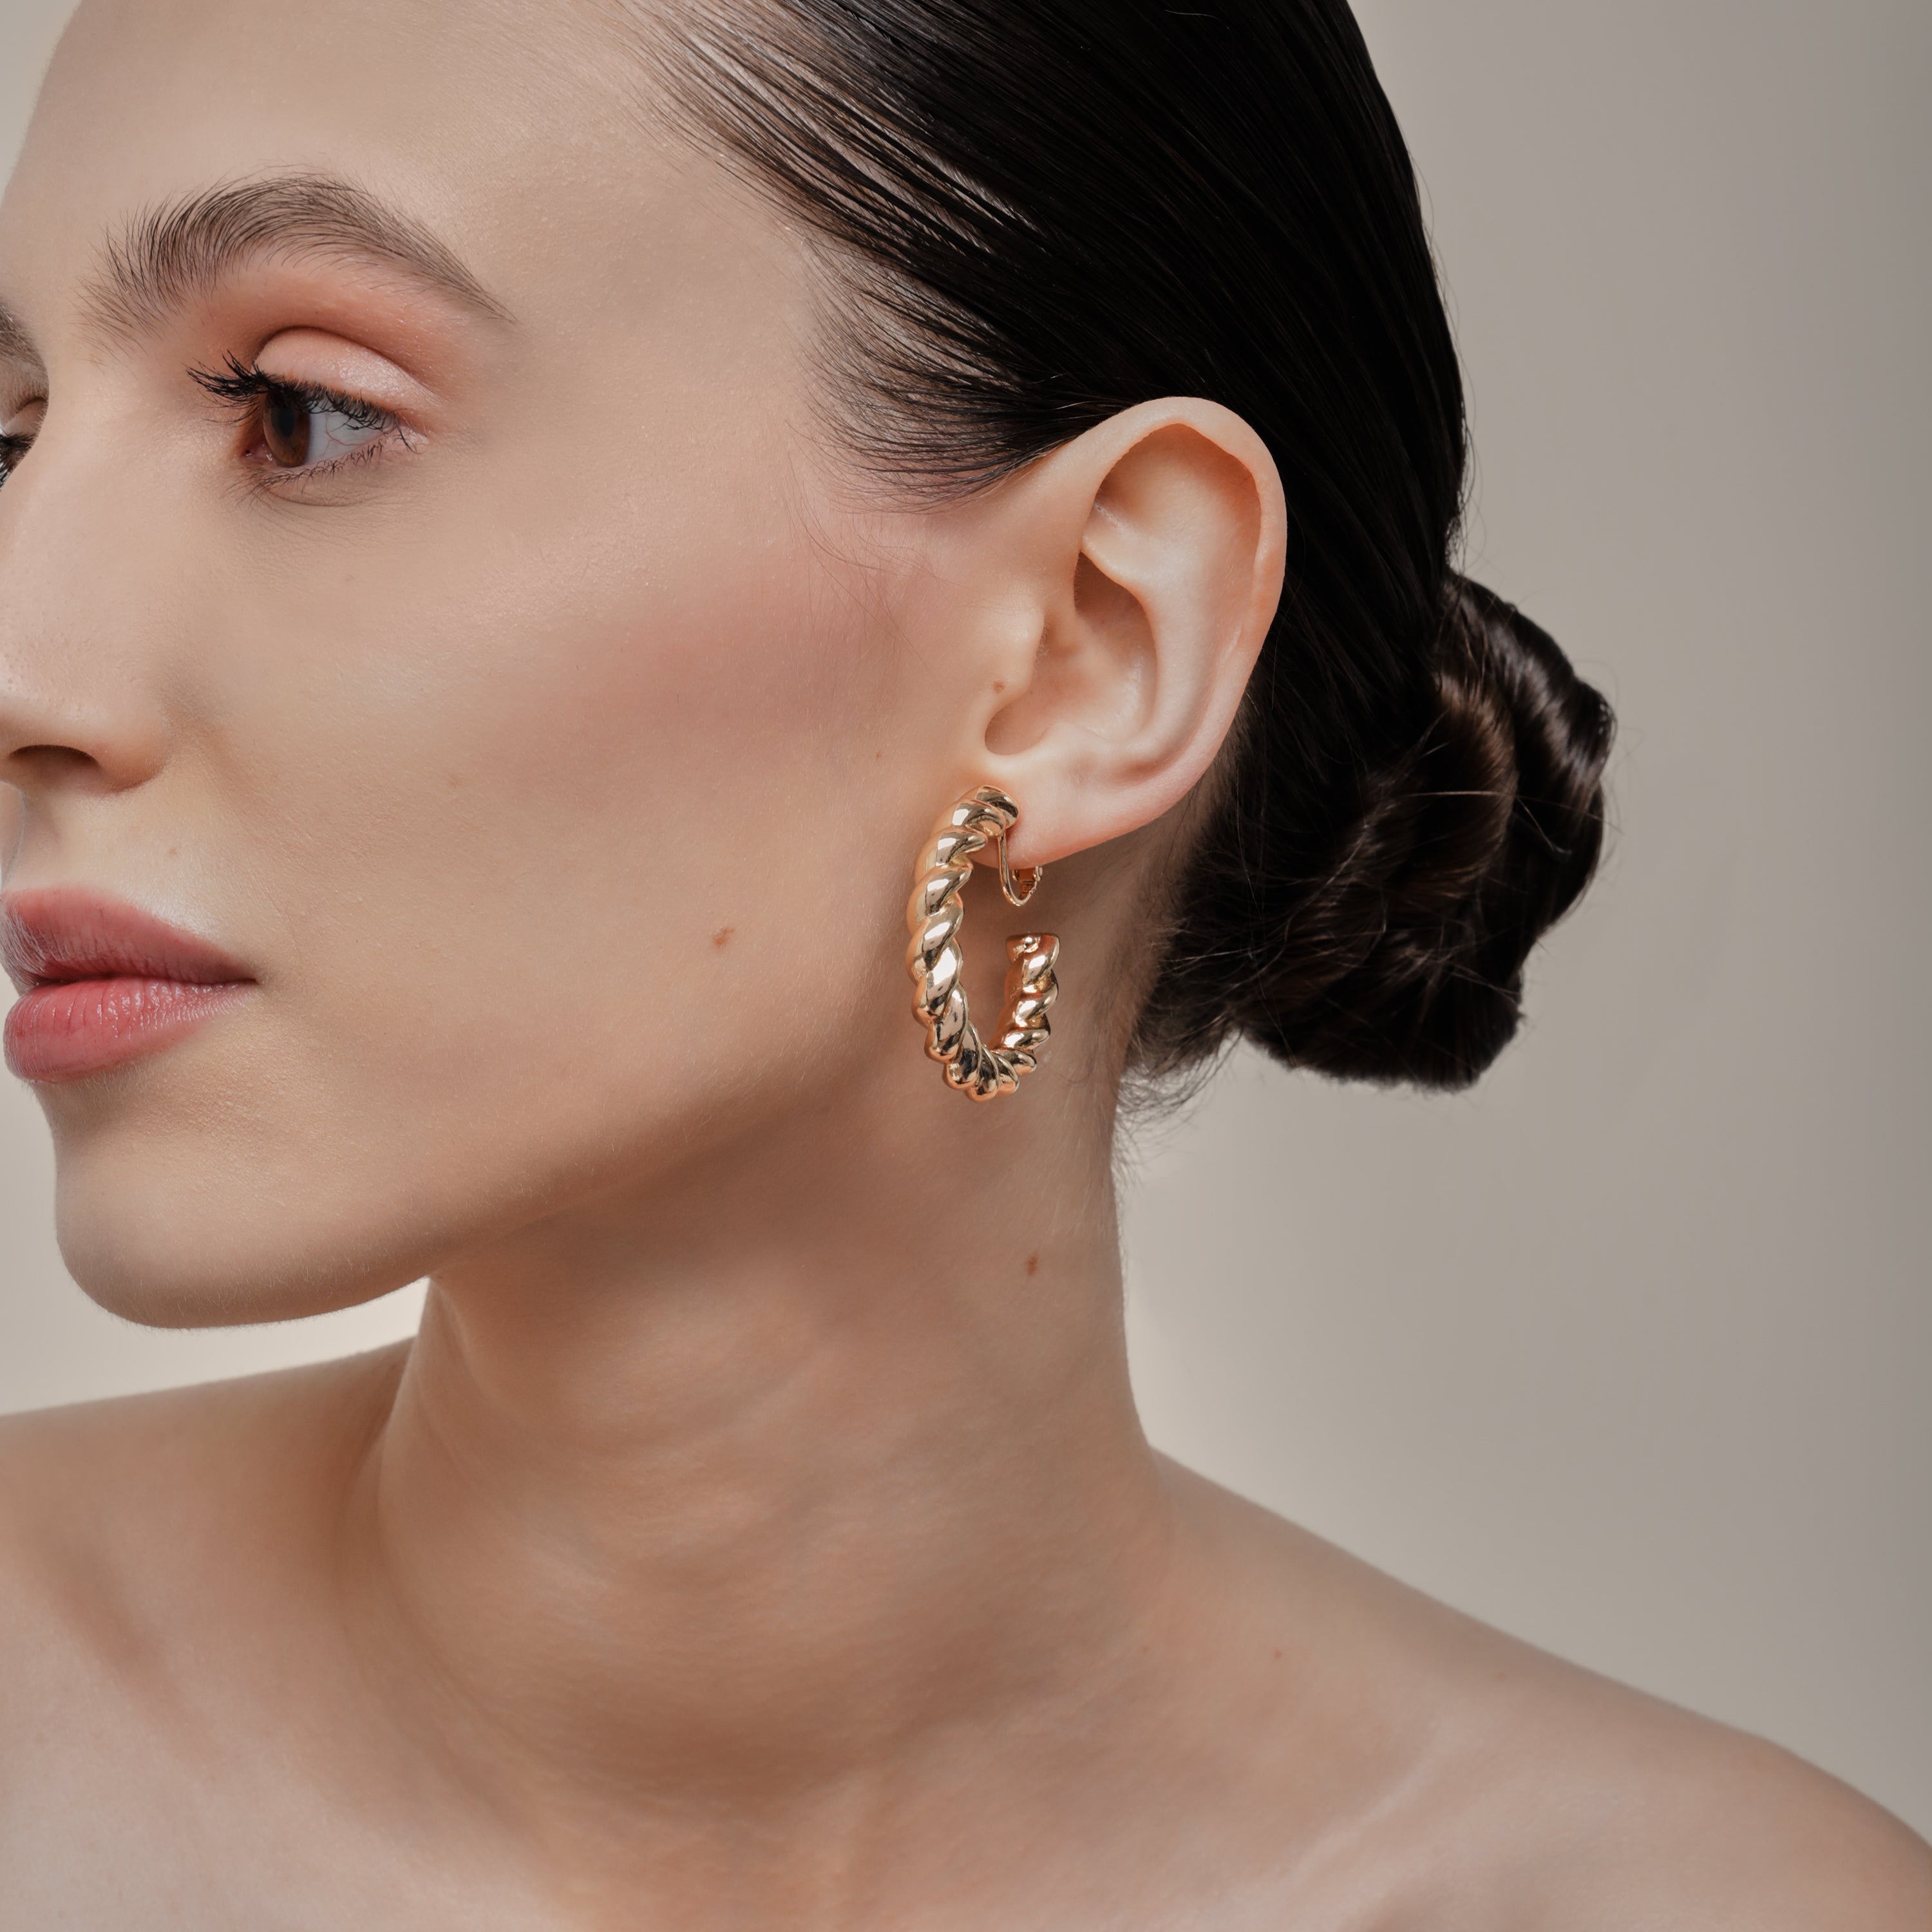 A model wearing the Large Croissant Hoop Clip On Earrings in Gold. These elegant hoops are equipped with a secure screwback closure and adjustable fit to keep them in place all day, even for those with sensitive or keloid prone ears. Enjoy up to 12 hours of comfortable wear in style.